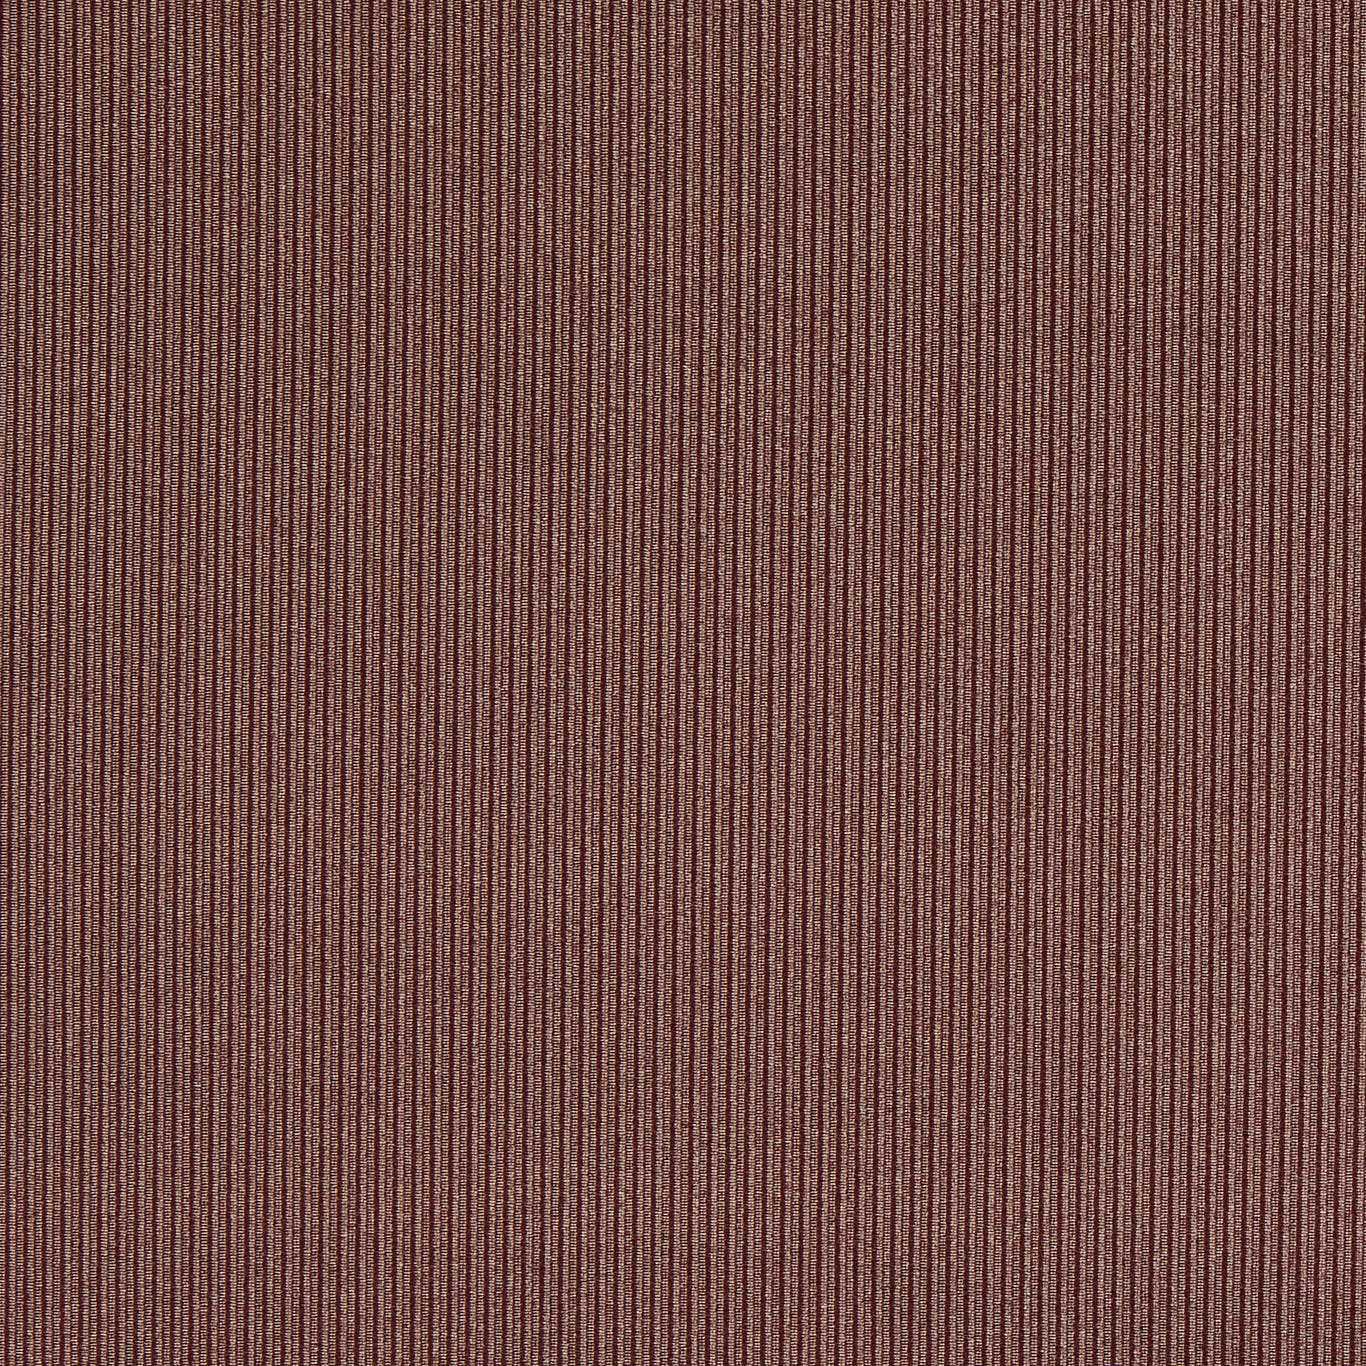 Ashdown Mulberry Fabric by CNC